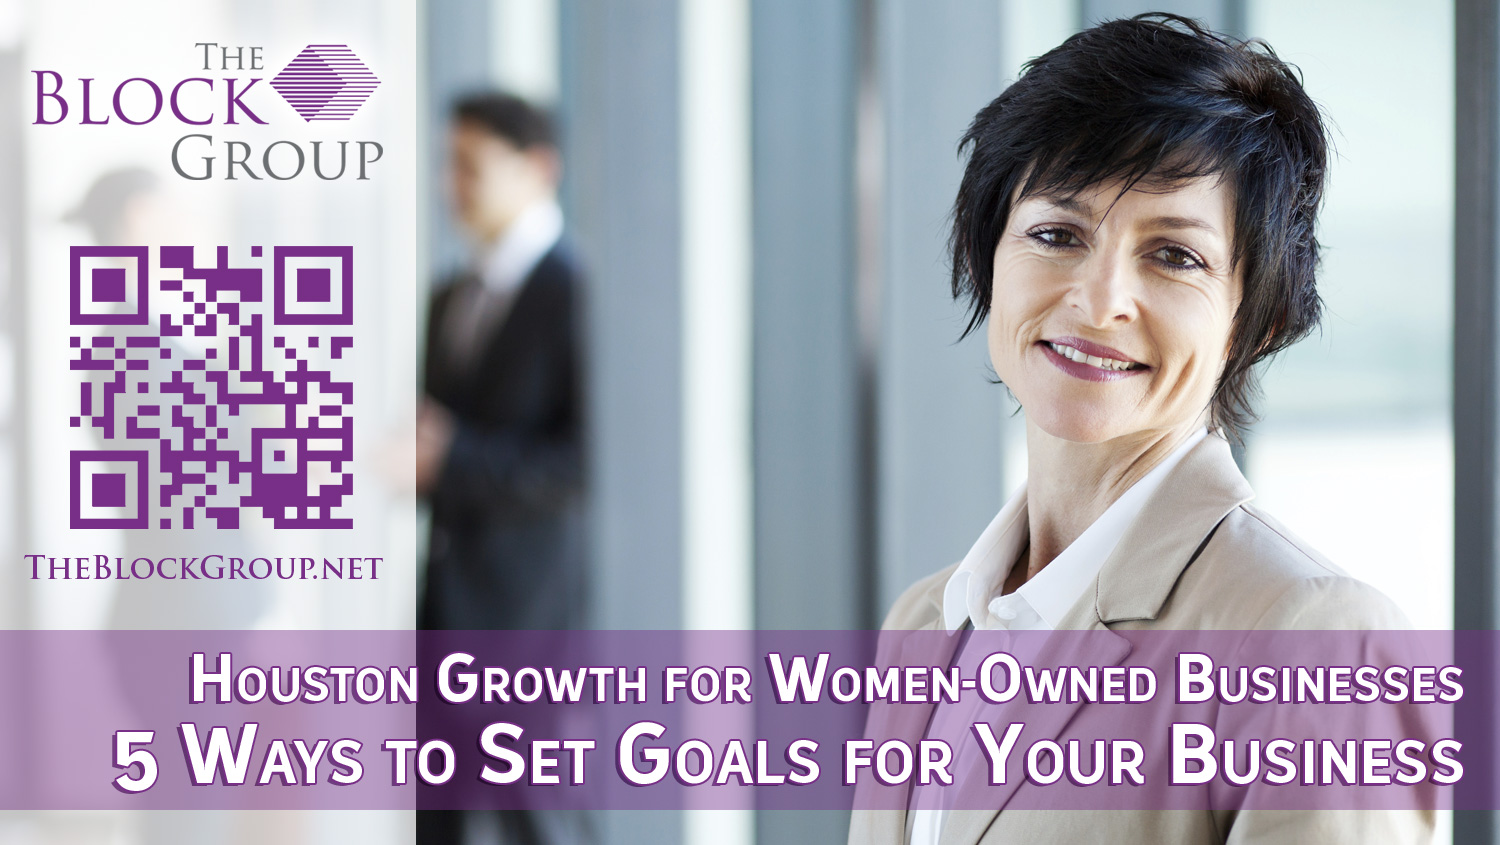 02-Houston-Growth-for-Women-Owned-Businesses